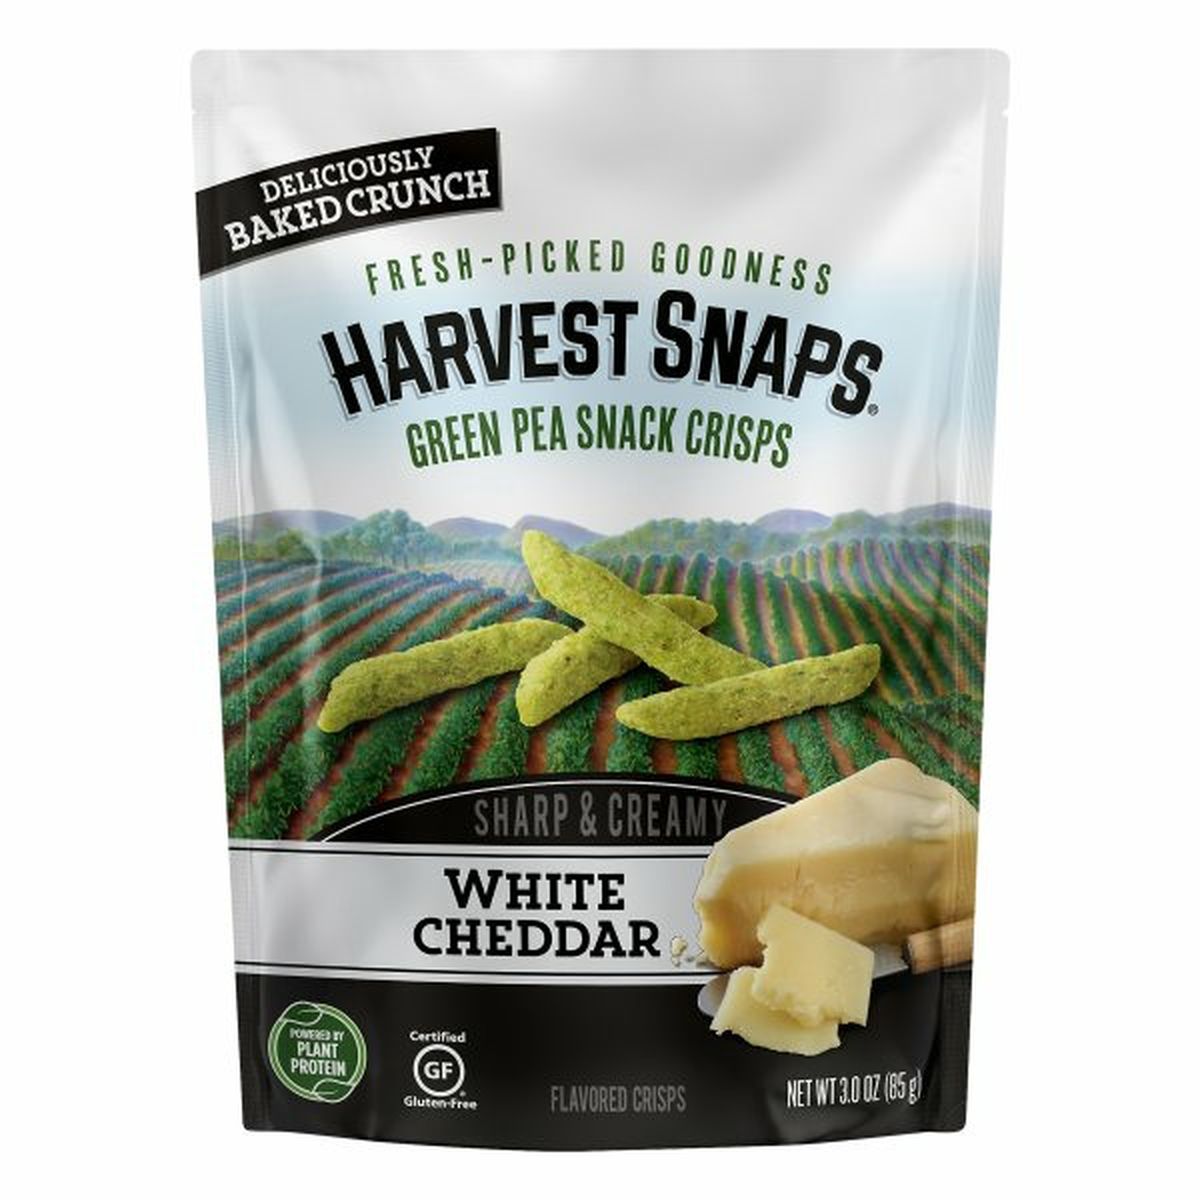 Calories in Harvest Snaps Green Pea Snack Crisps, White Cheddar, Sharp & Creamy